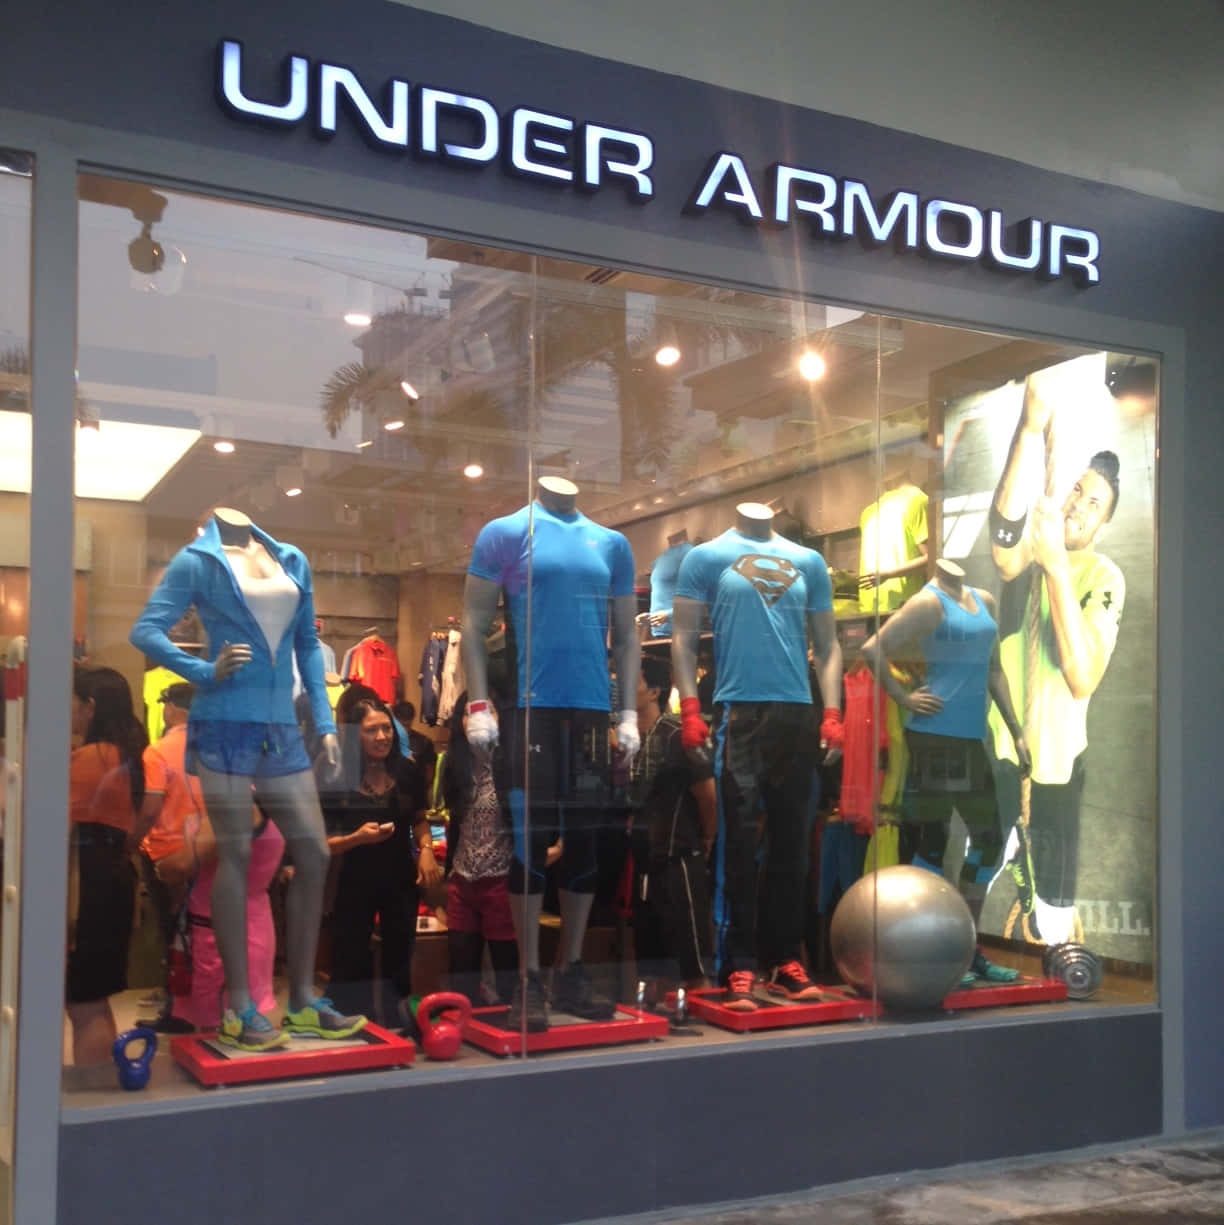 Look your best in Under Armour's athleisure style